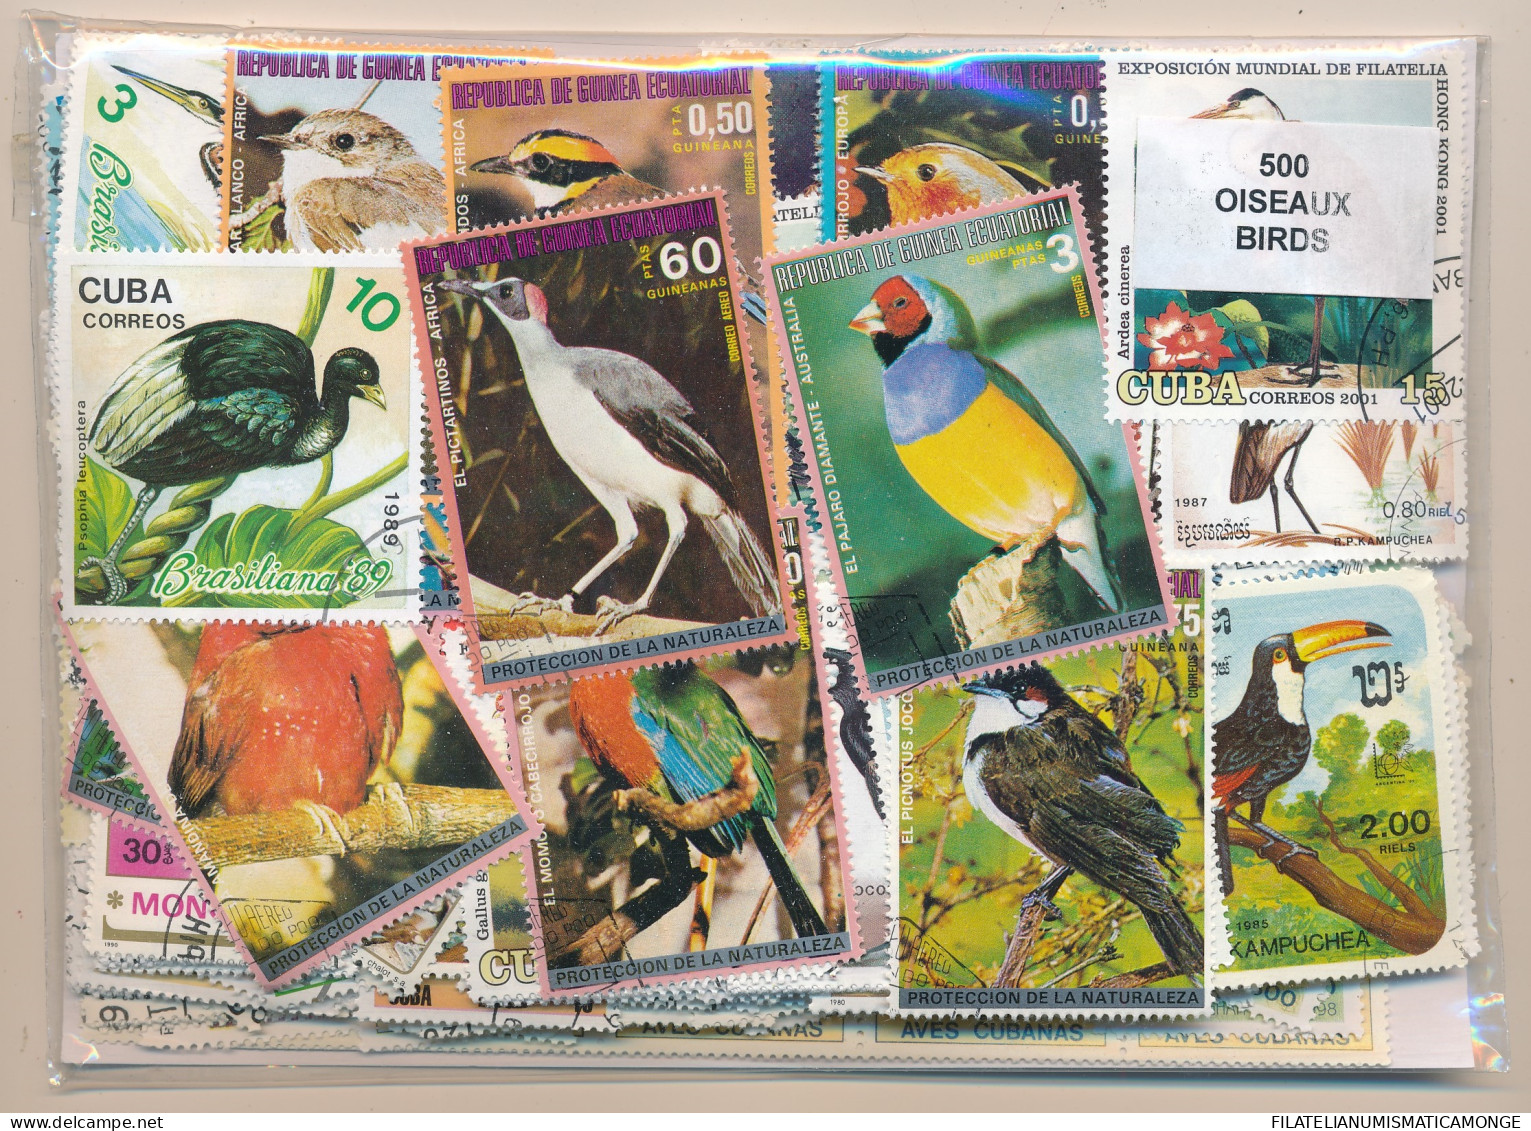 Offer   Lot Stamp - Paqueteria -   500 Sellos Diferentes Pajaros  (Mixed Condi - Vrac (max 999 Timbres)